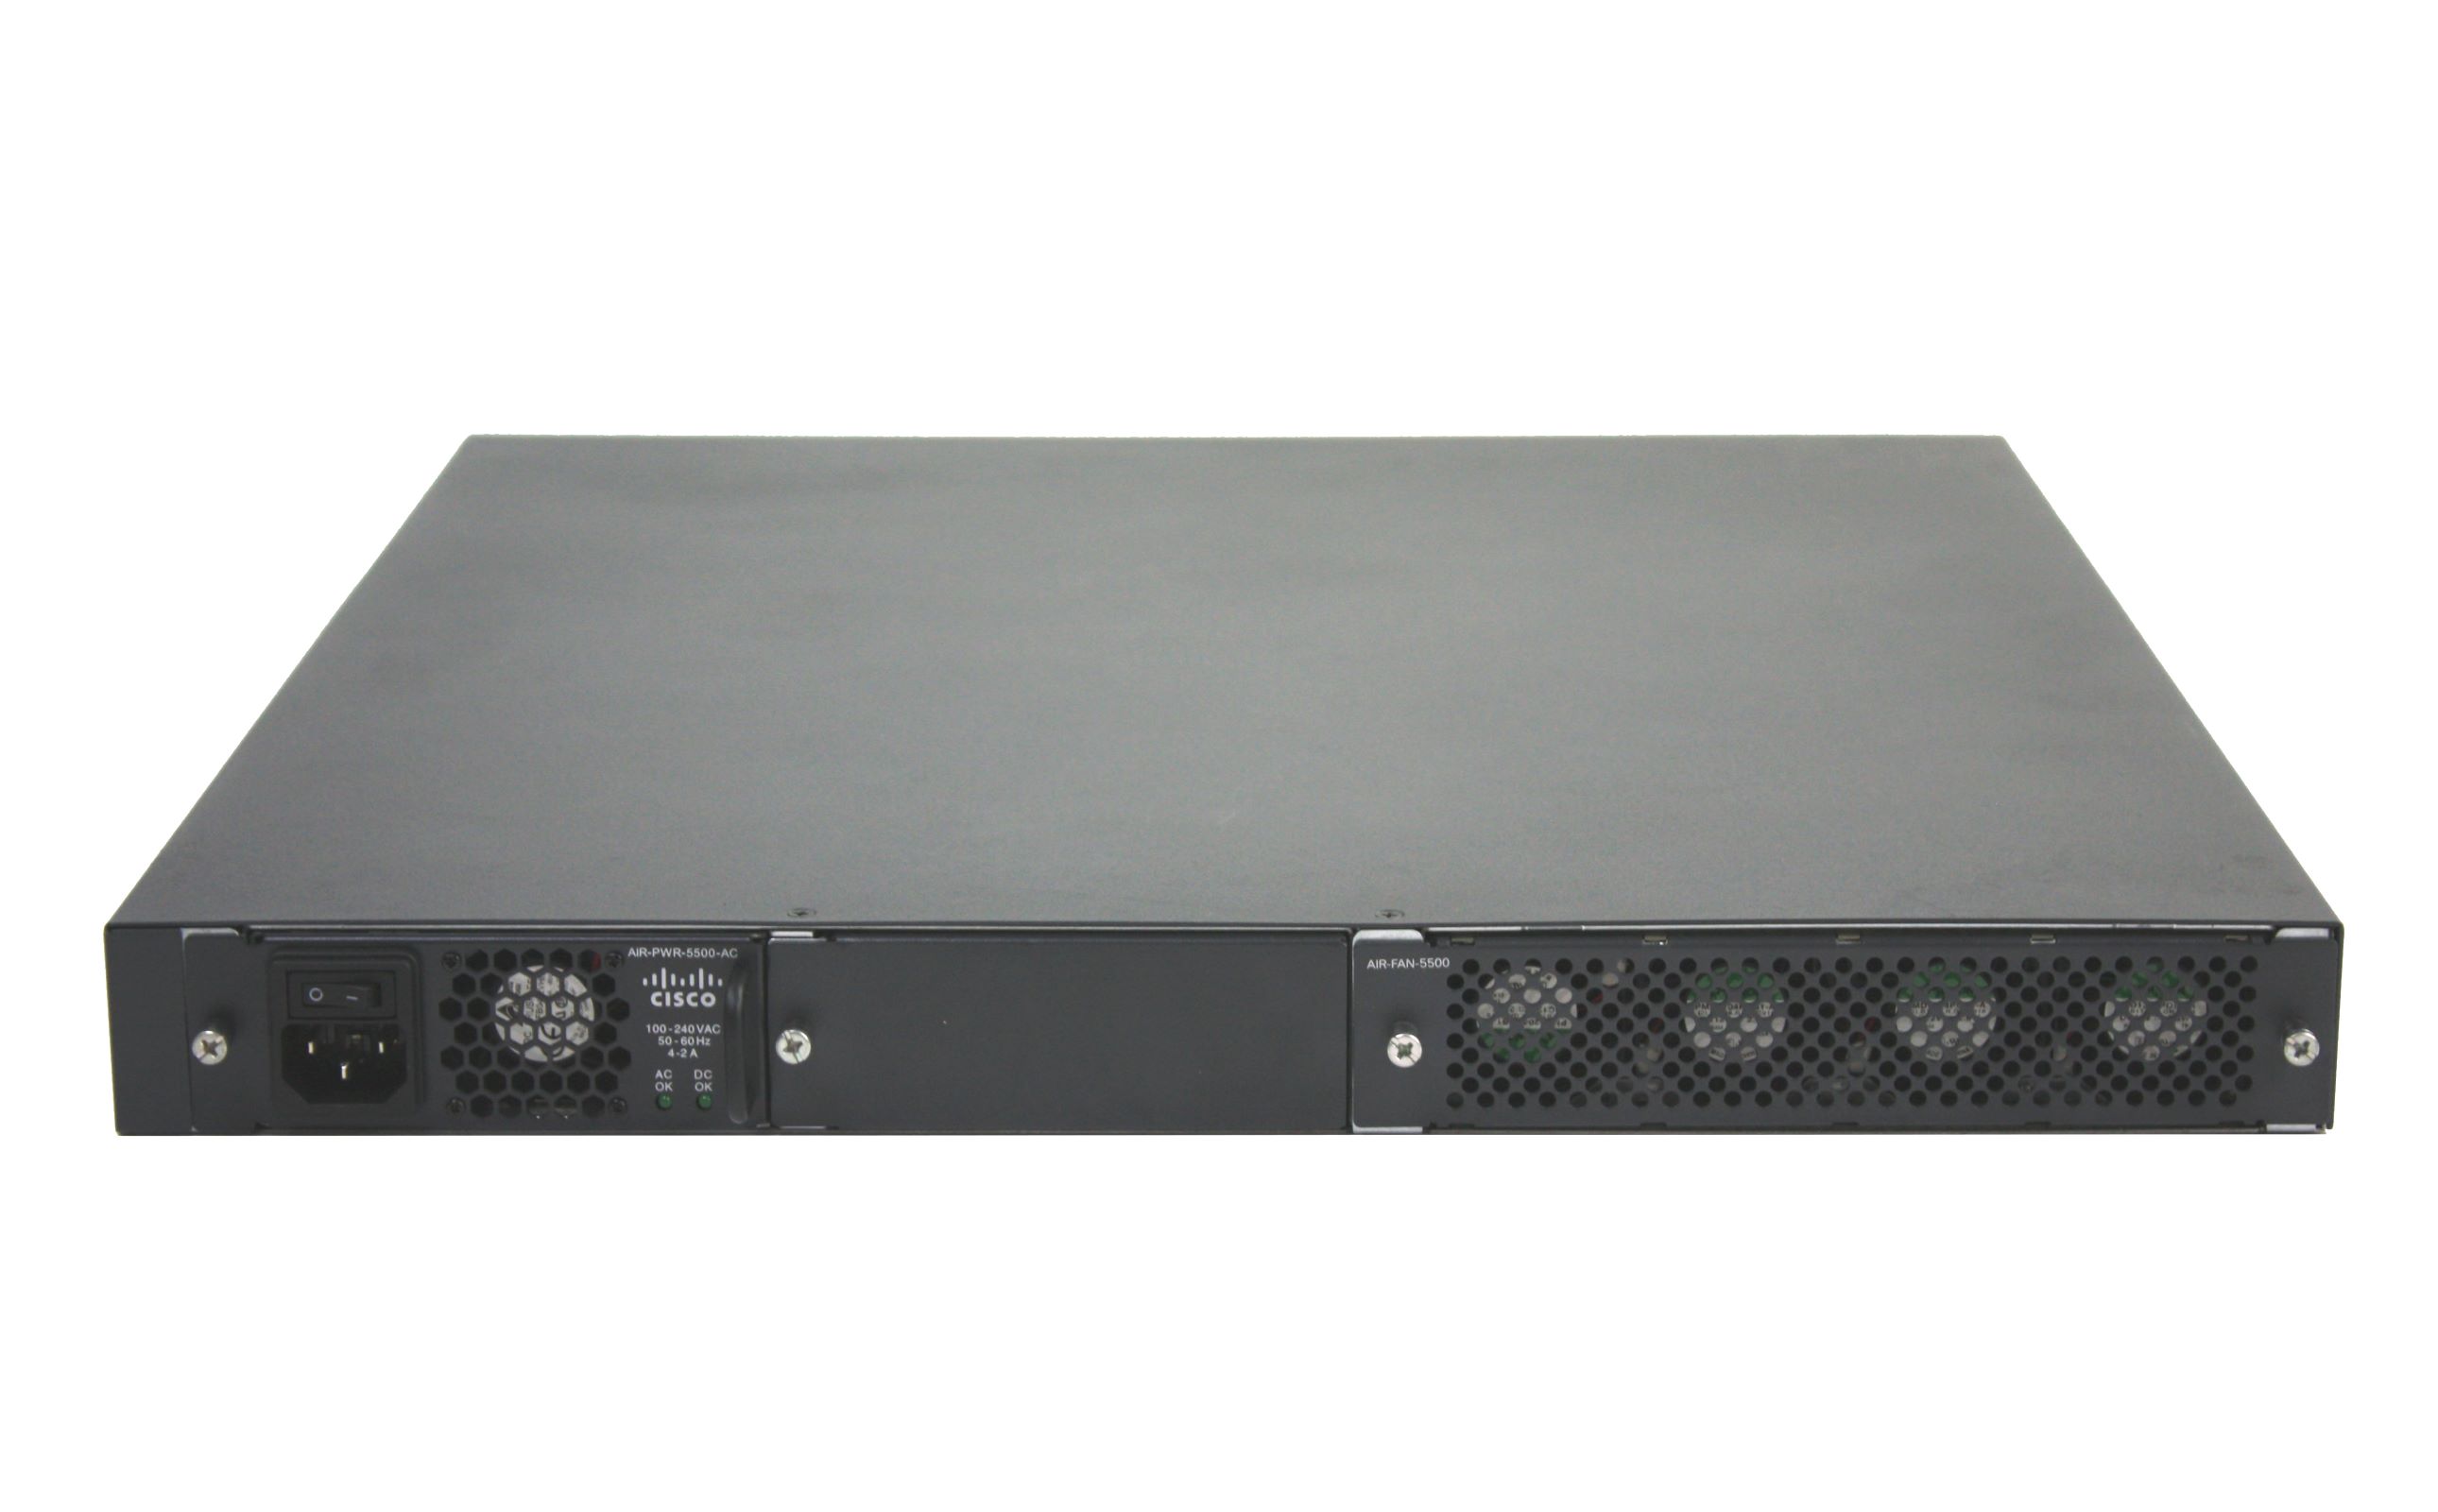 Cisco - AIR-CT5508-50-K9 - 5508 Series Controller for up to 50 APs new and  refurbished buy online low prices